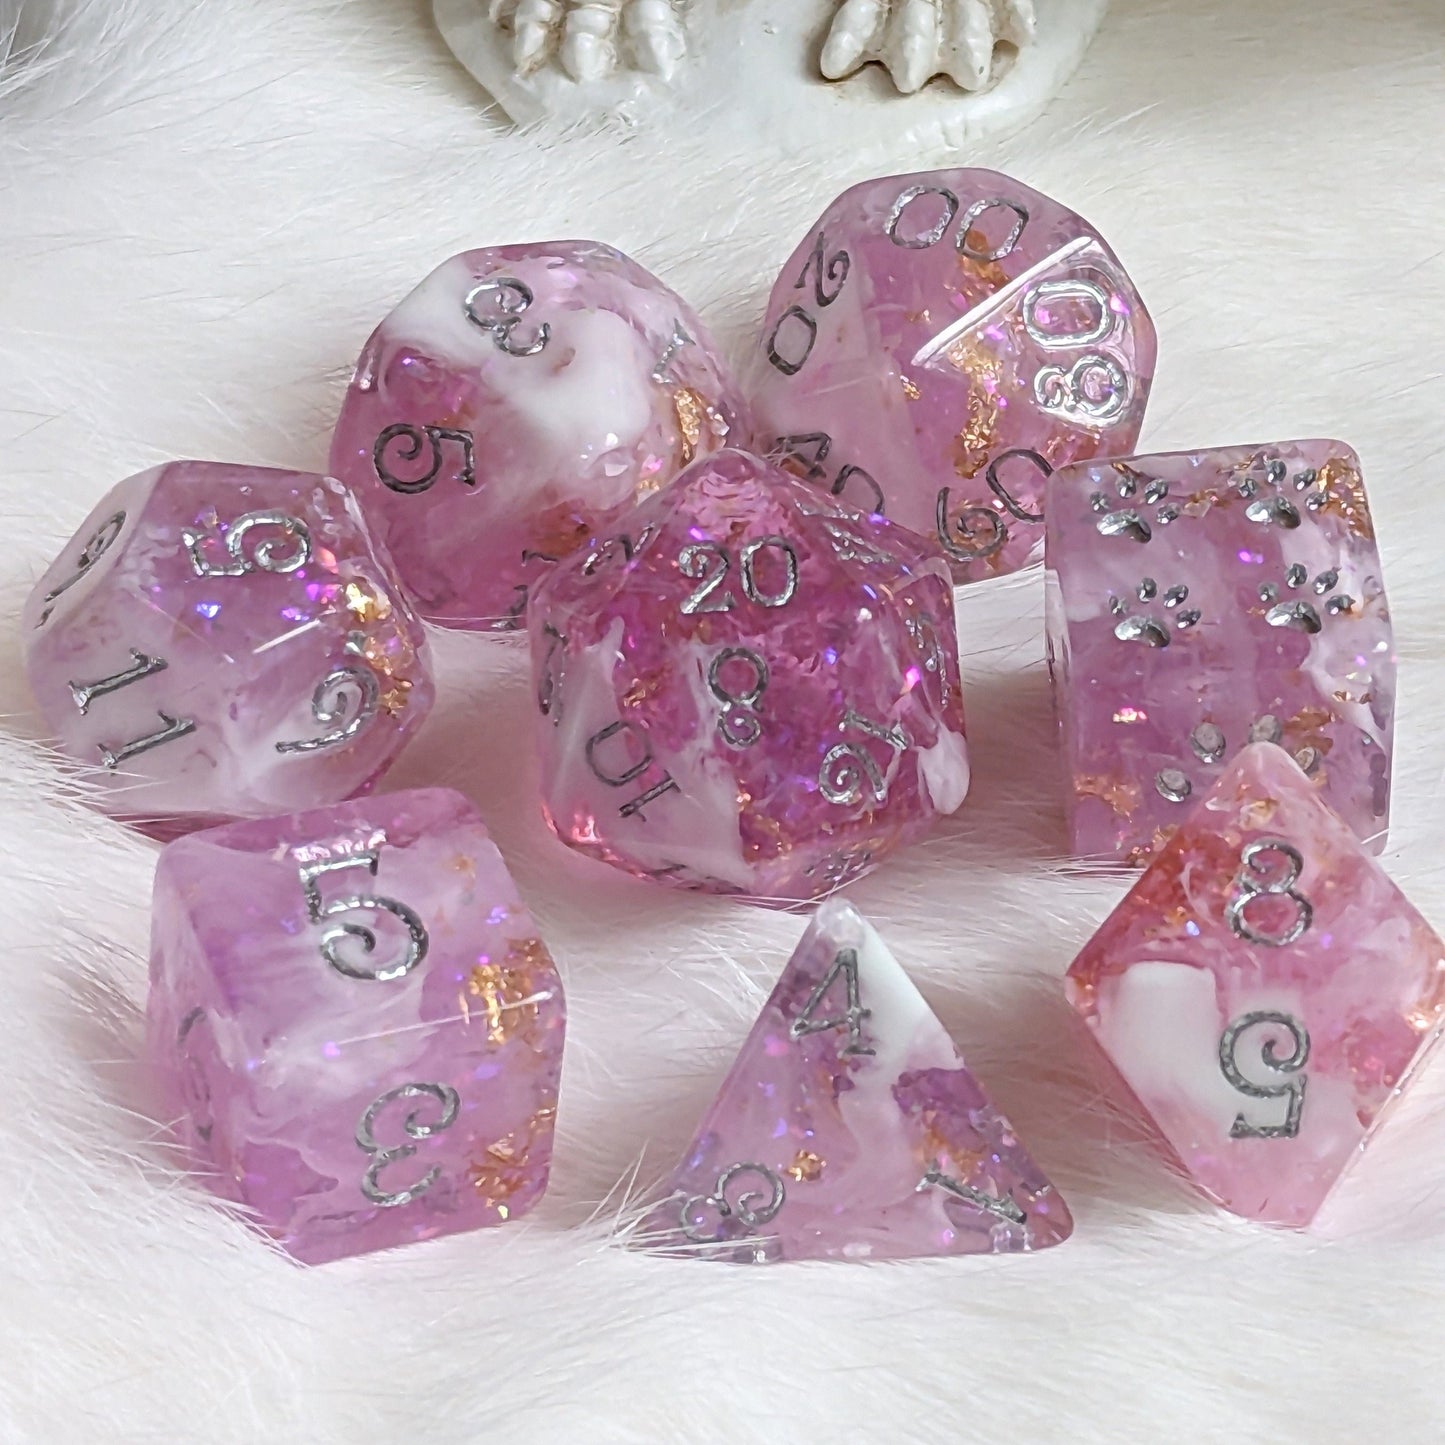 Mauve 8 Piece Dice Set. Clear Pink Purple and White Marble, with Glitter and Foil